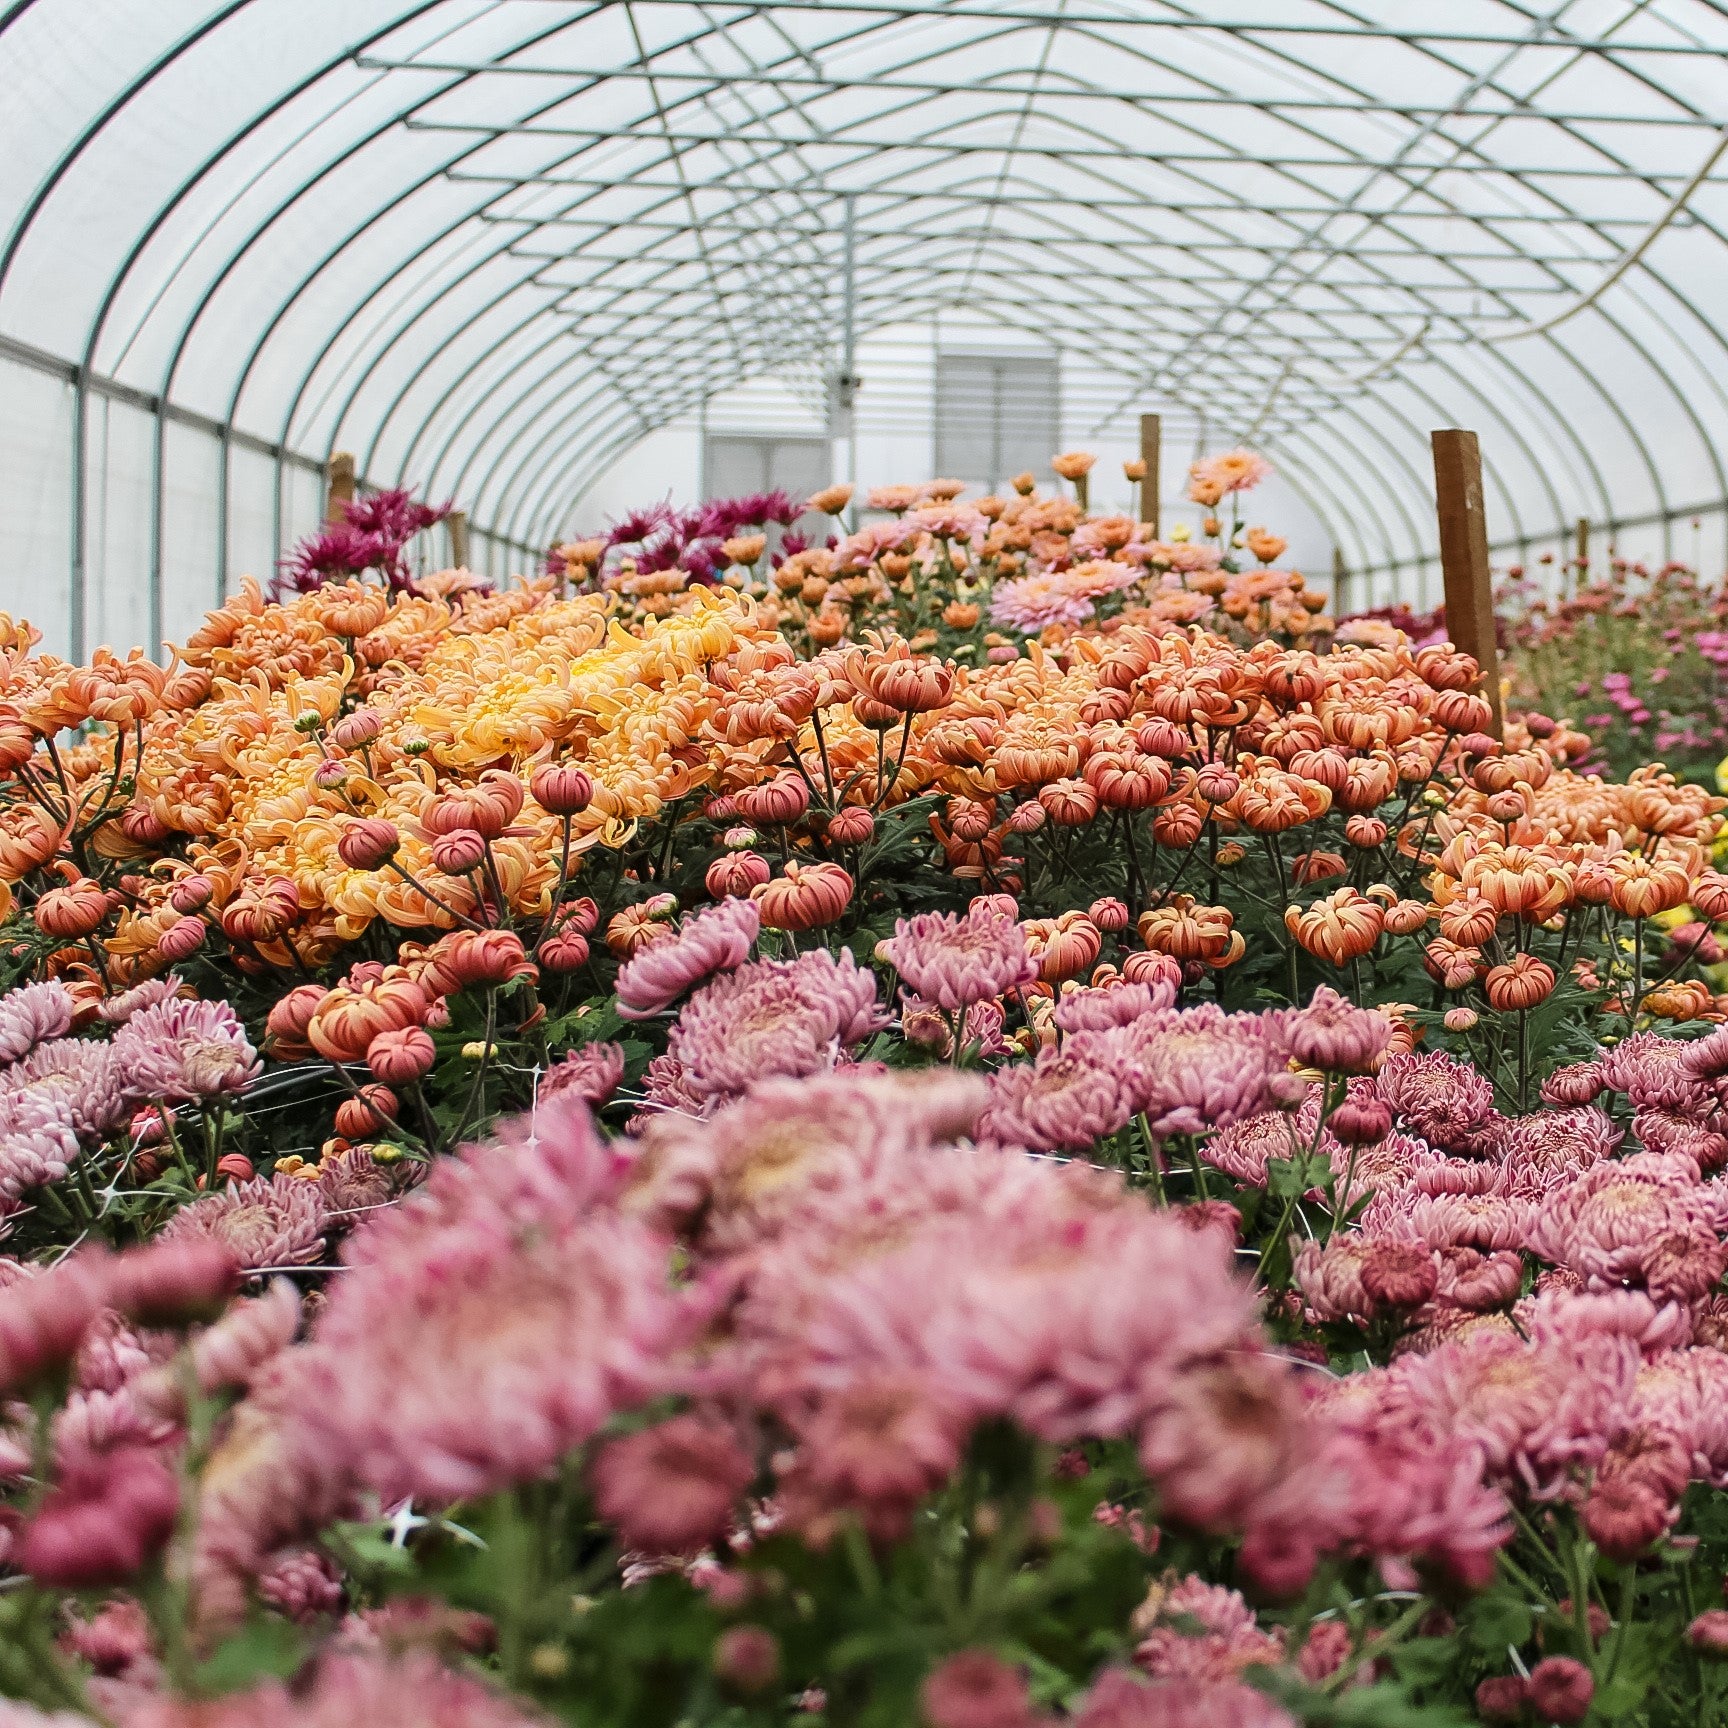 The Flower Diaries | Why You Should Be Obsessed With Heirloom Chrysanthemums